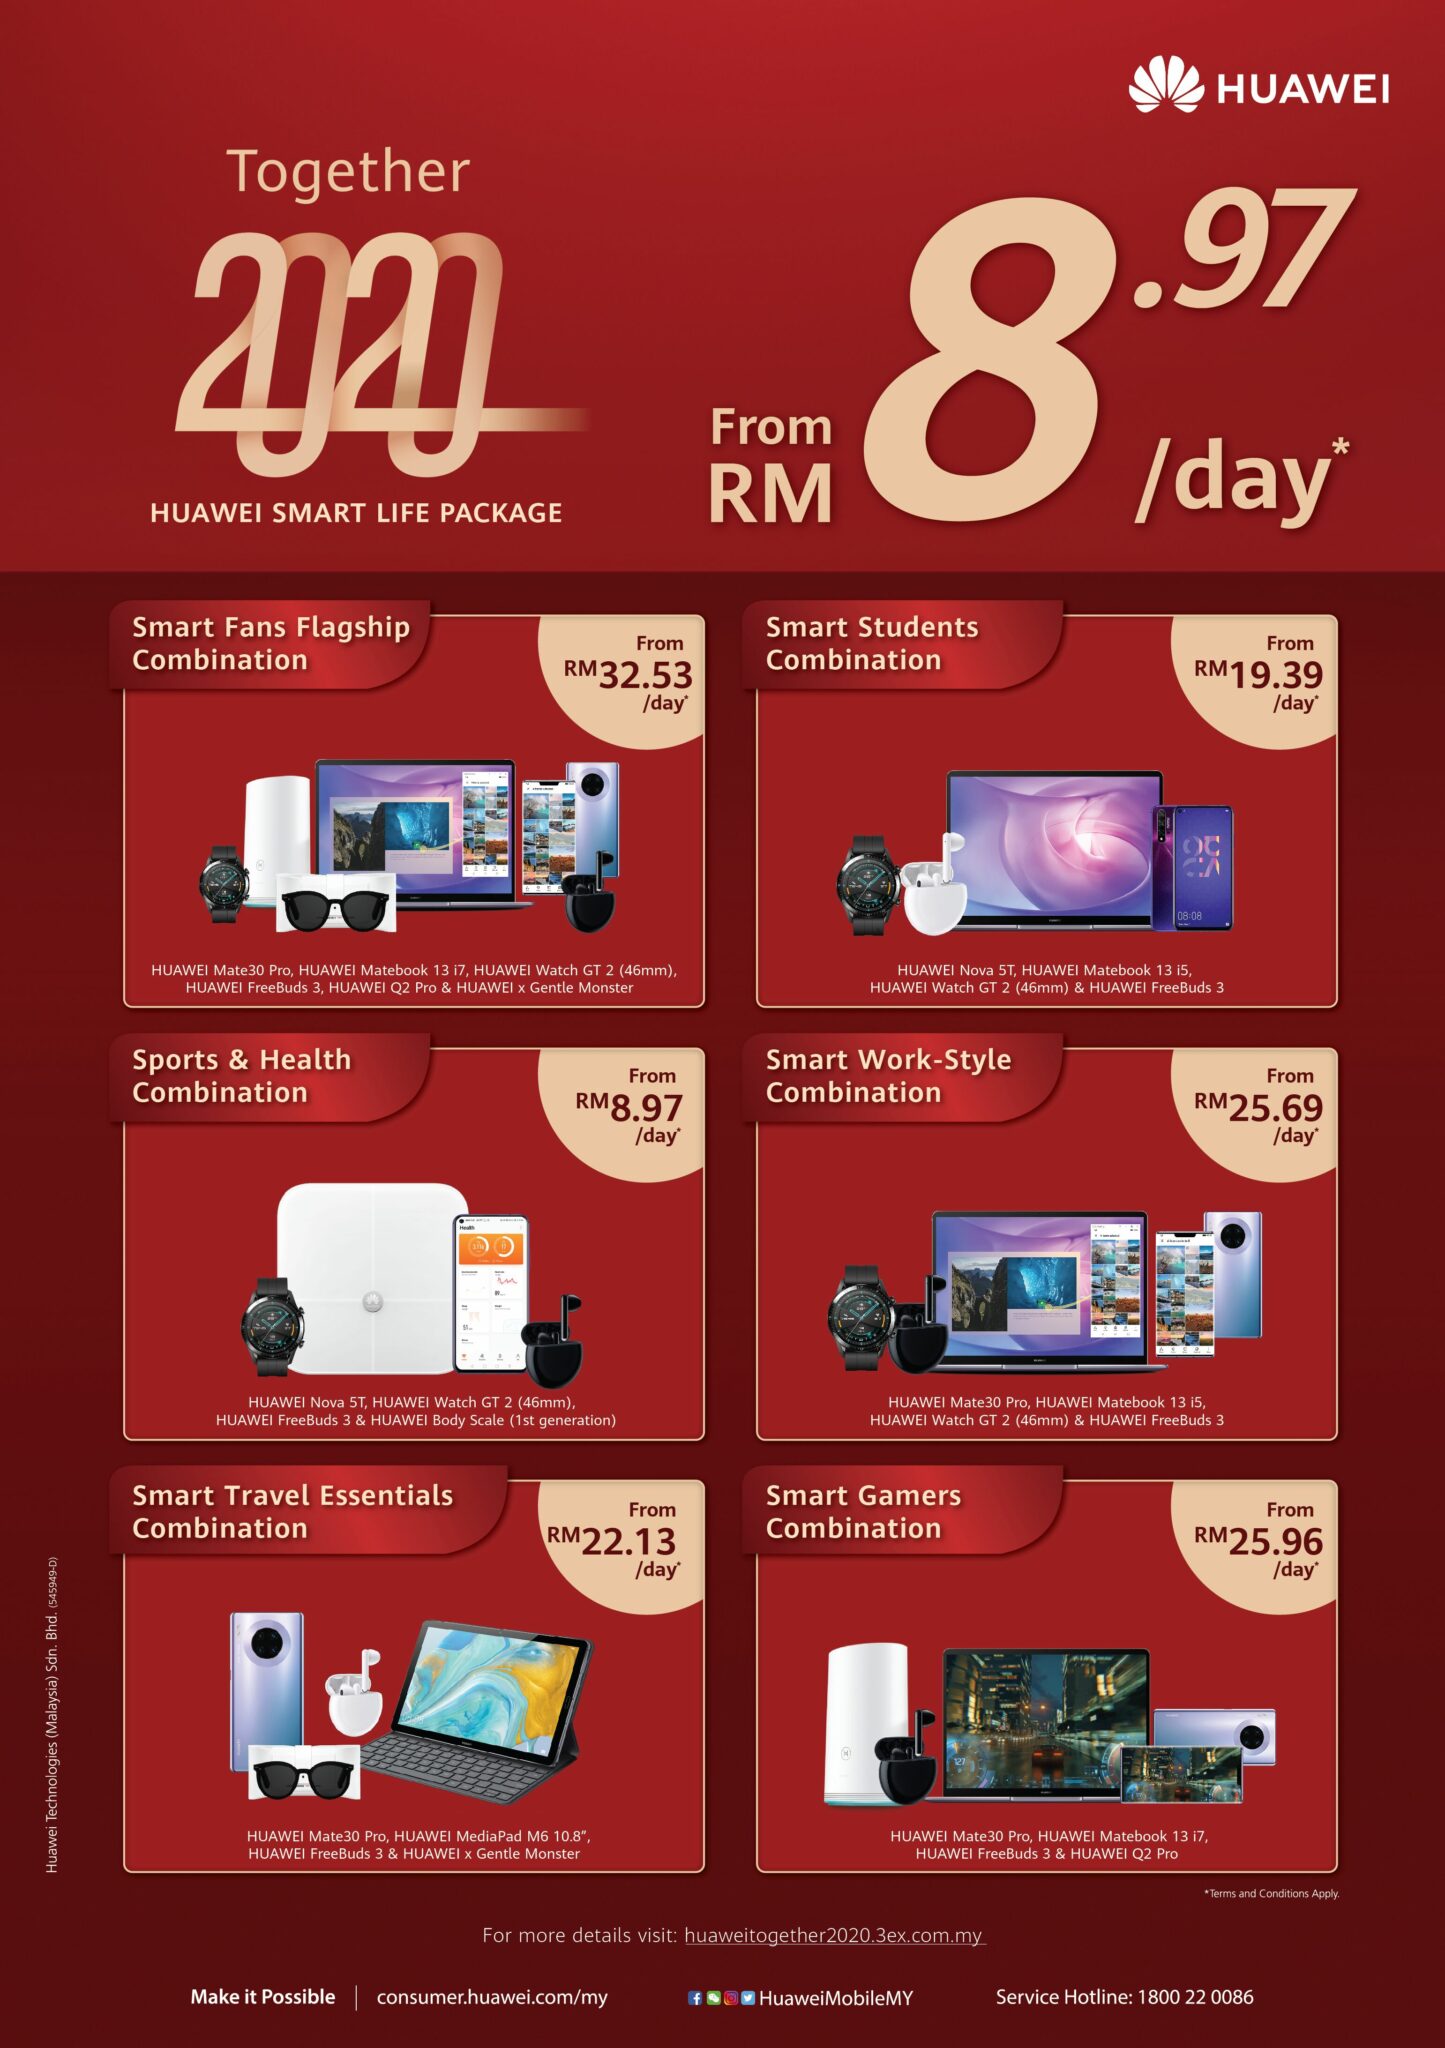 Huawei Smart Life Daily Installment Packages available from RM8.97/day plus crazy deals like the P30 Pro on 12/12 for RM12 2